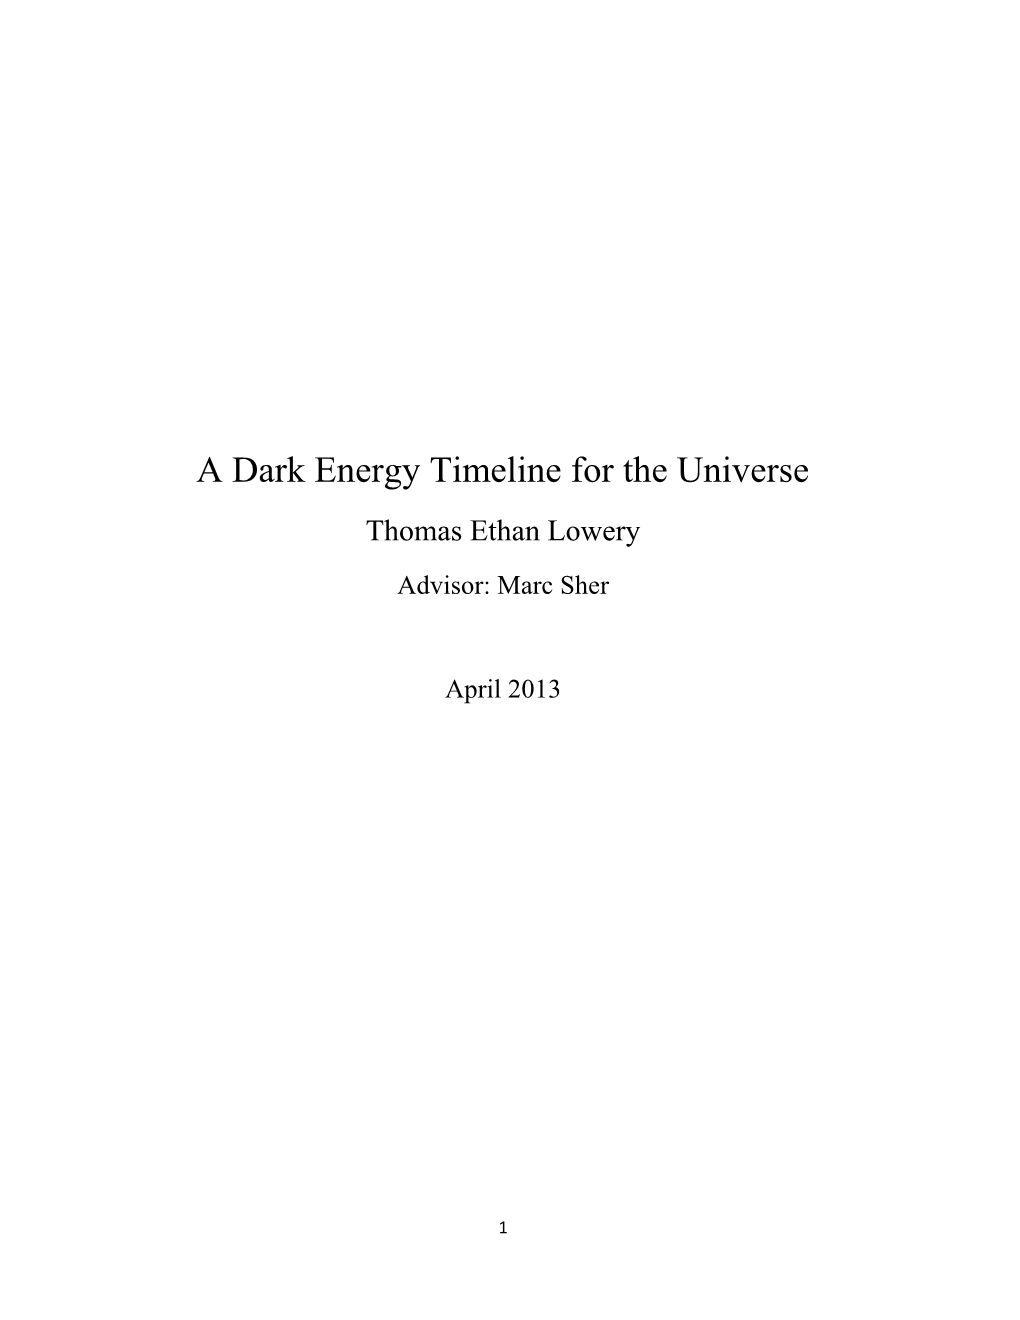 A Dark Energy Timeline for the Universe Thomas Ethan Lowery Advisor: Marc Sher